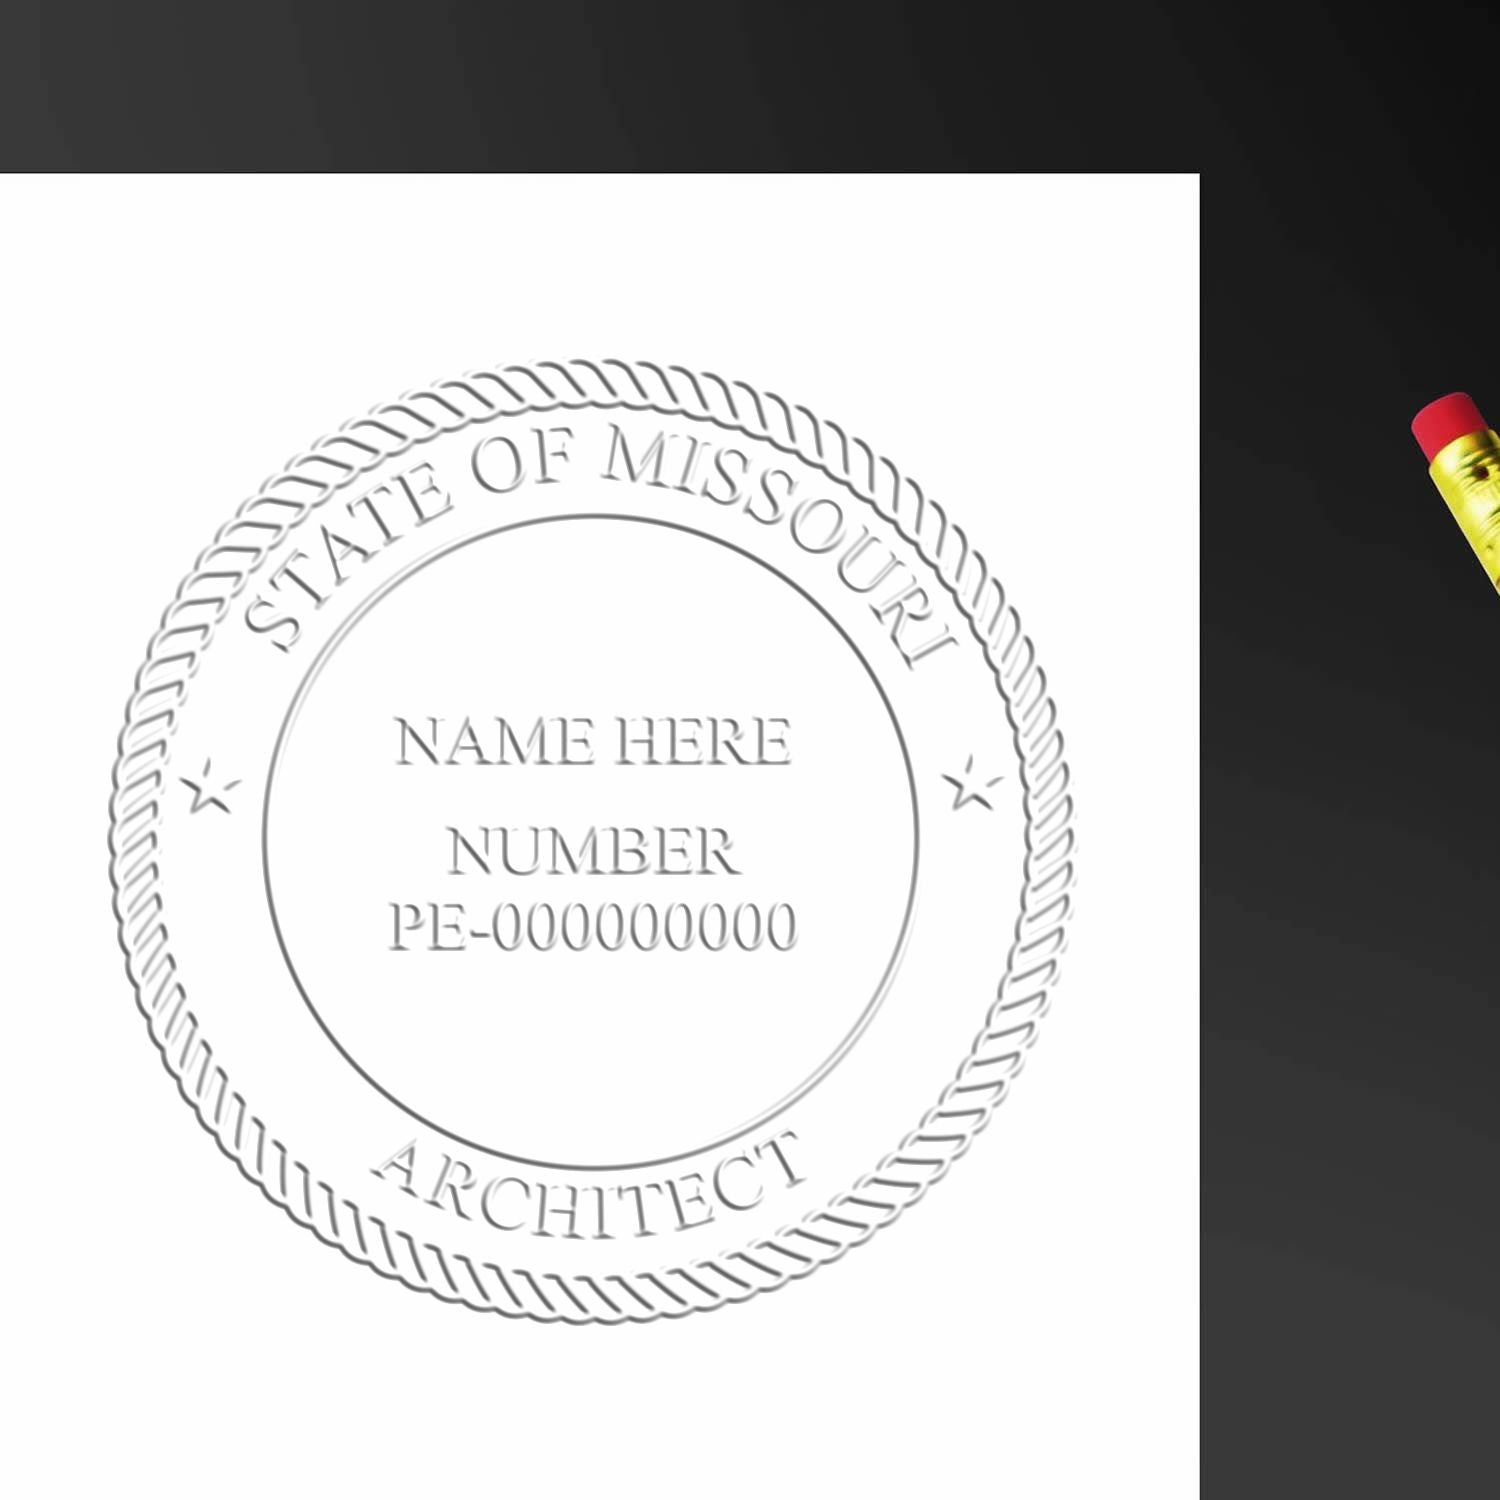 An in use photo of the Hybrid Missouri Architect Seal showing a sample imprint on a cardstock